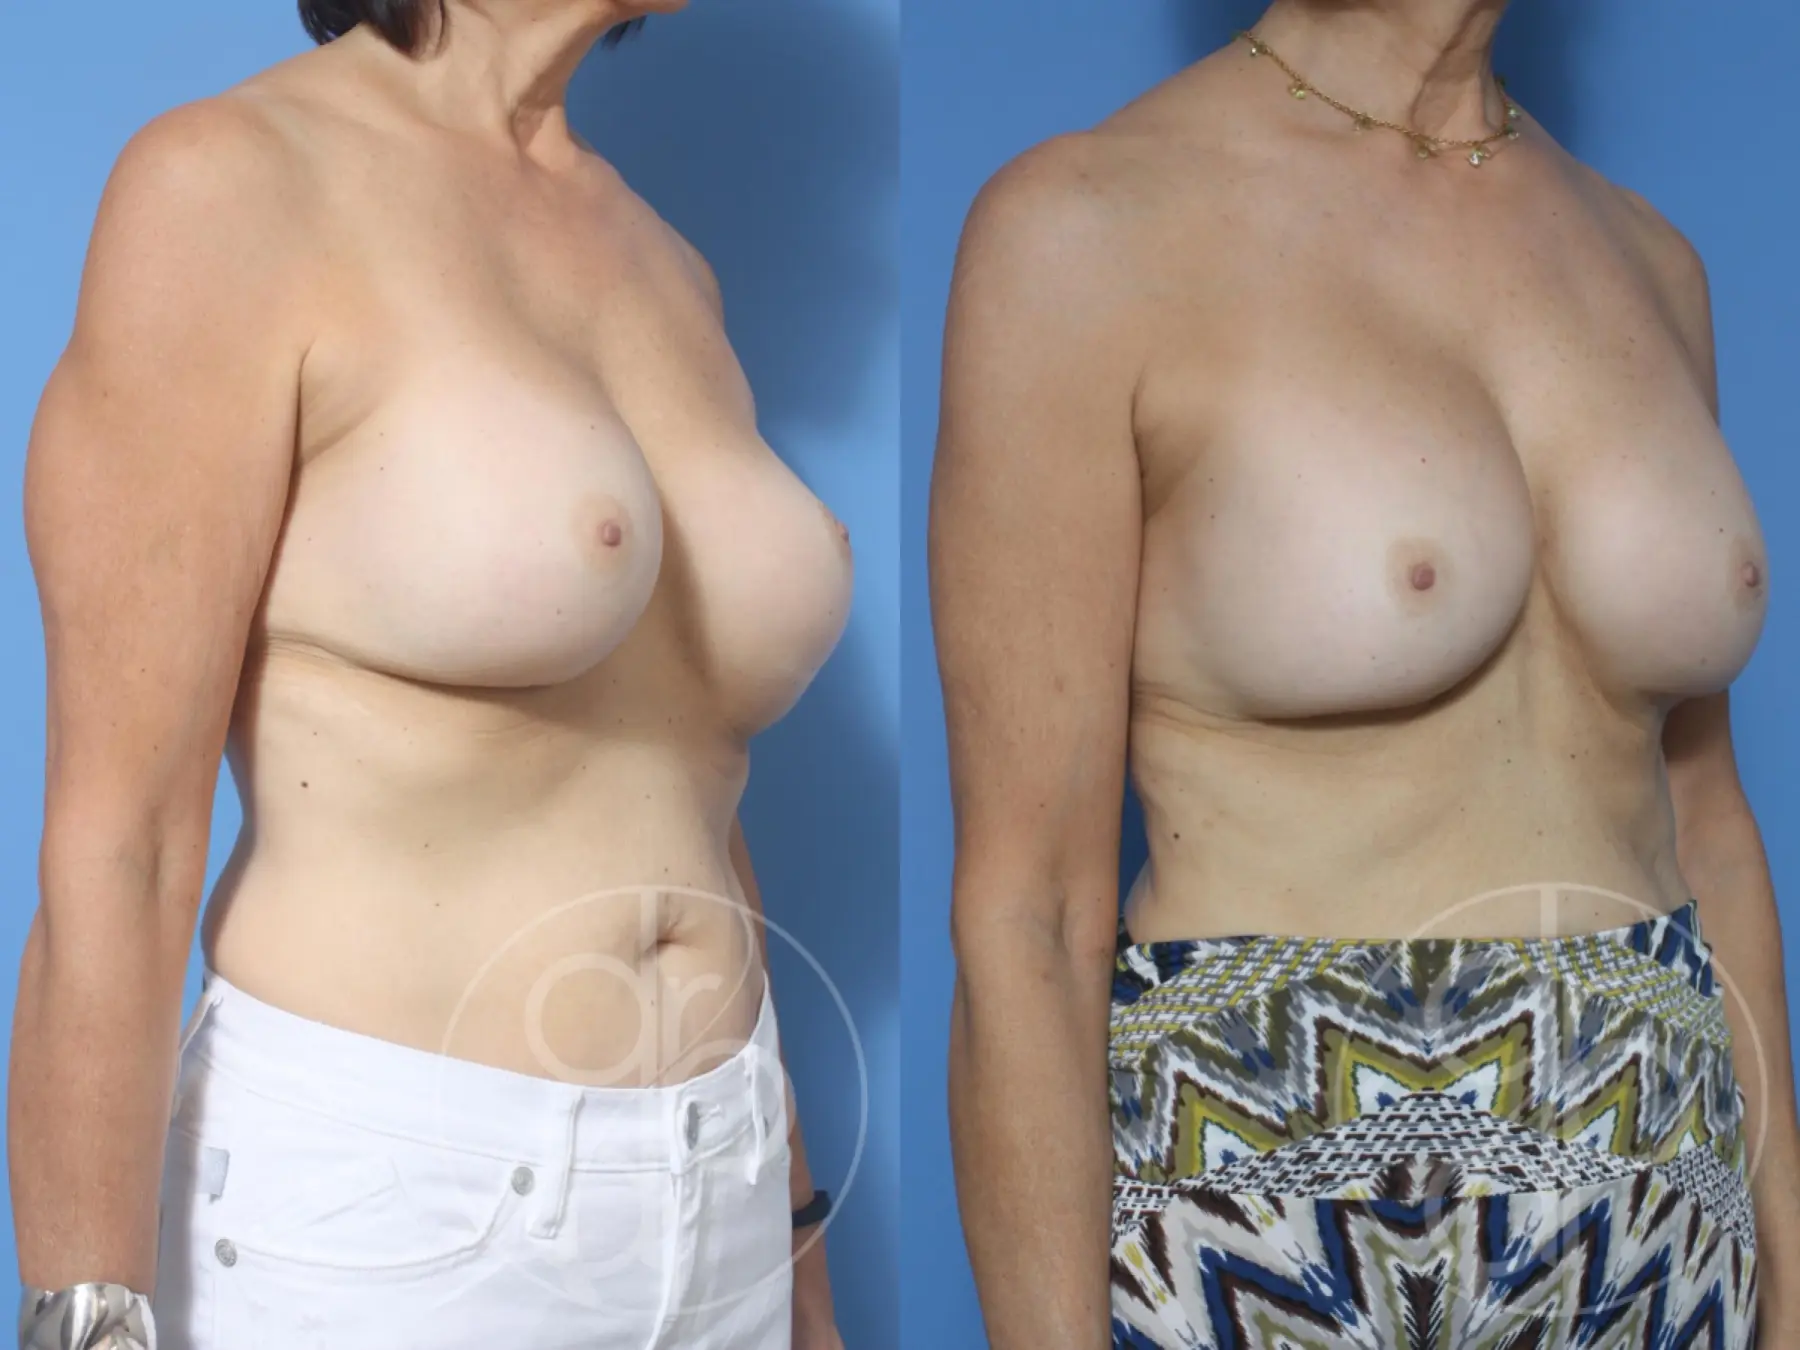 patient 12179 remove and replace breast implants before and after result - Before and After 2